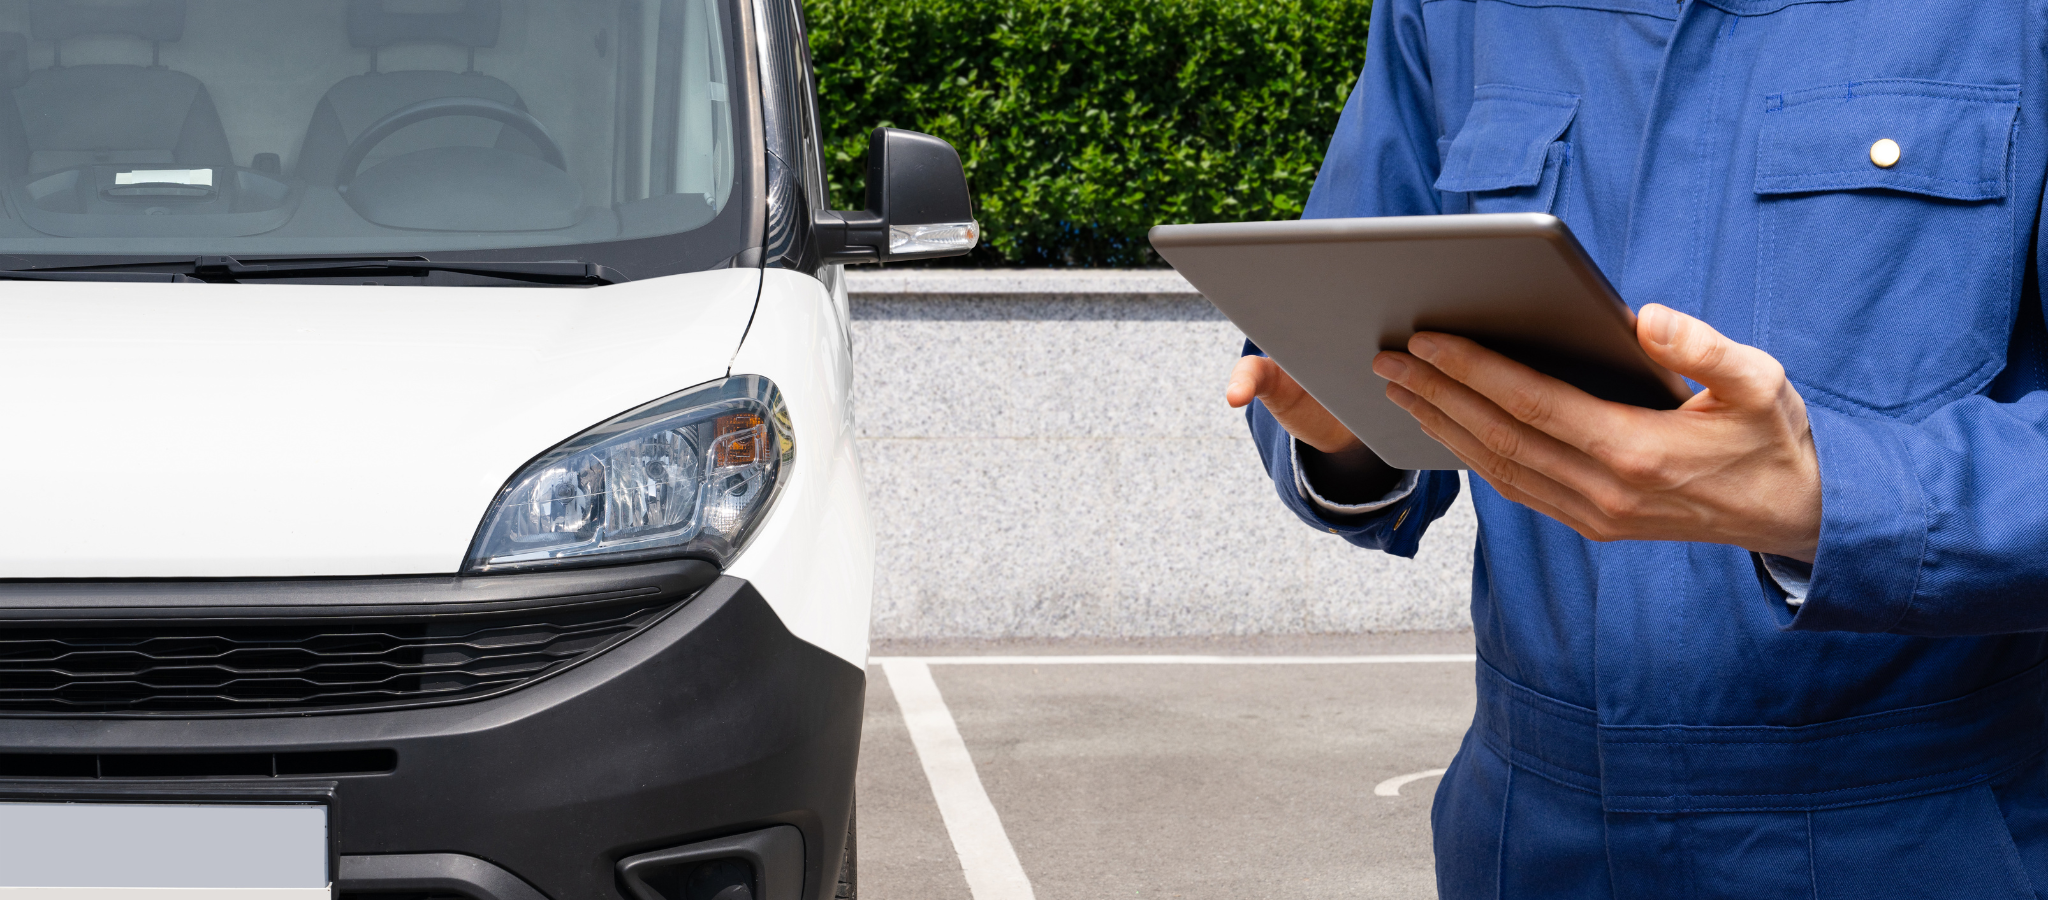 The Crucial Role of Weighing Technology in Fleet Management